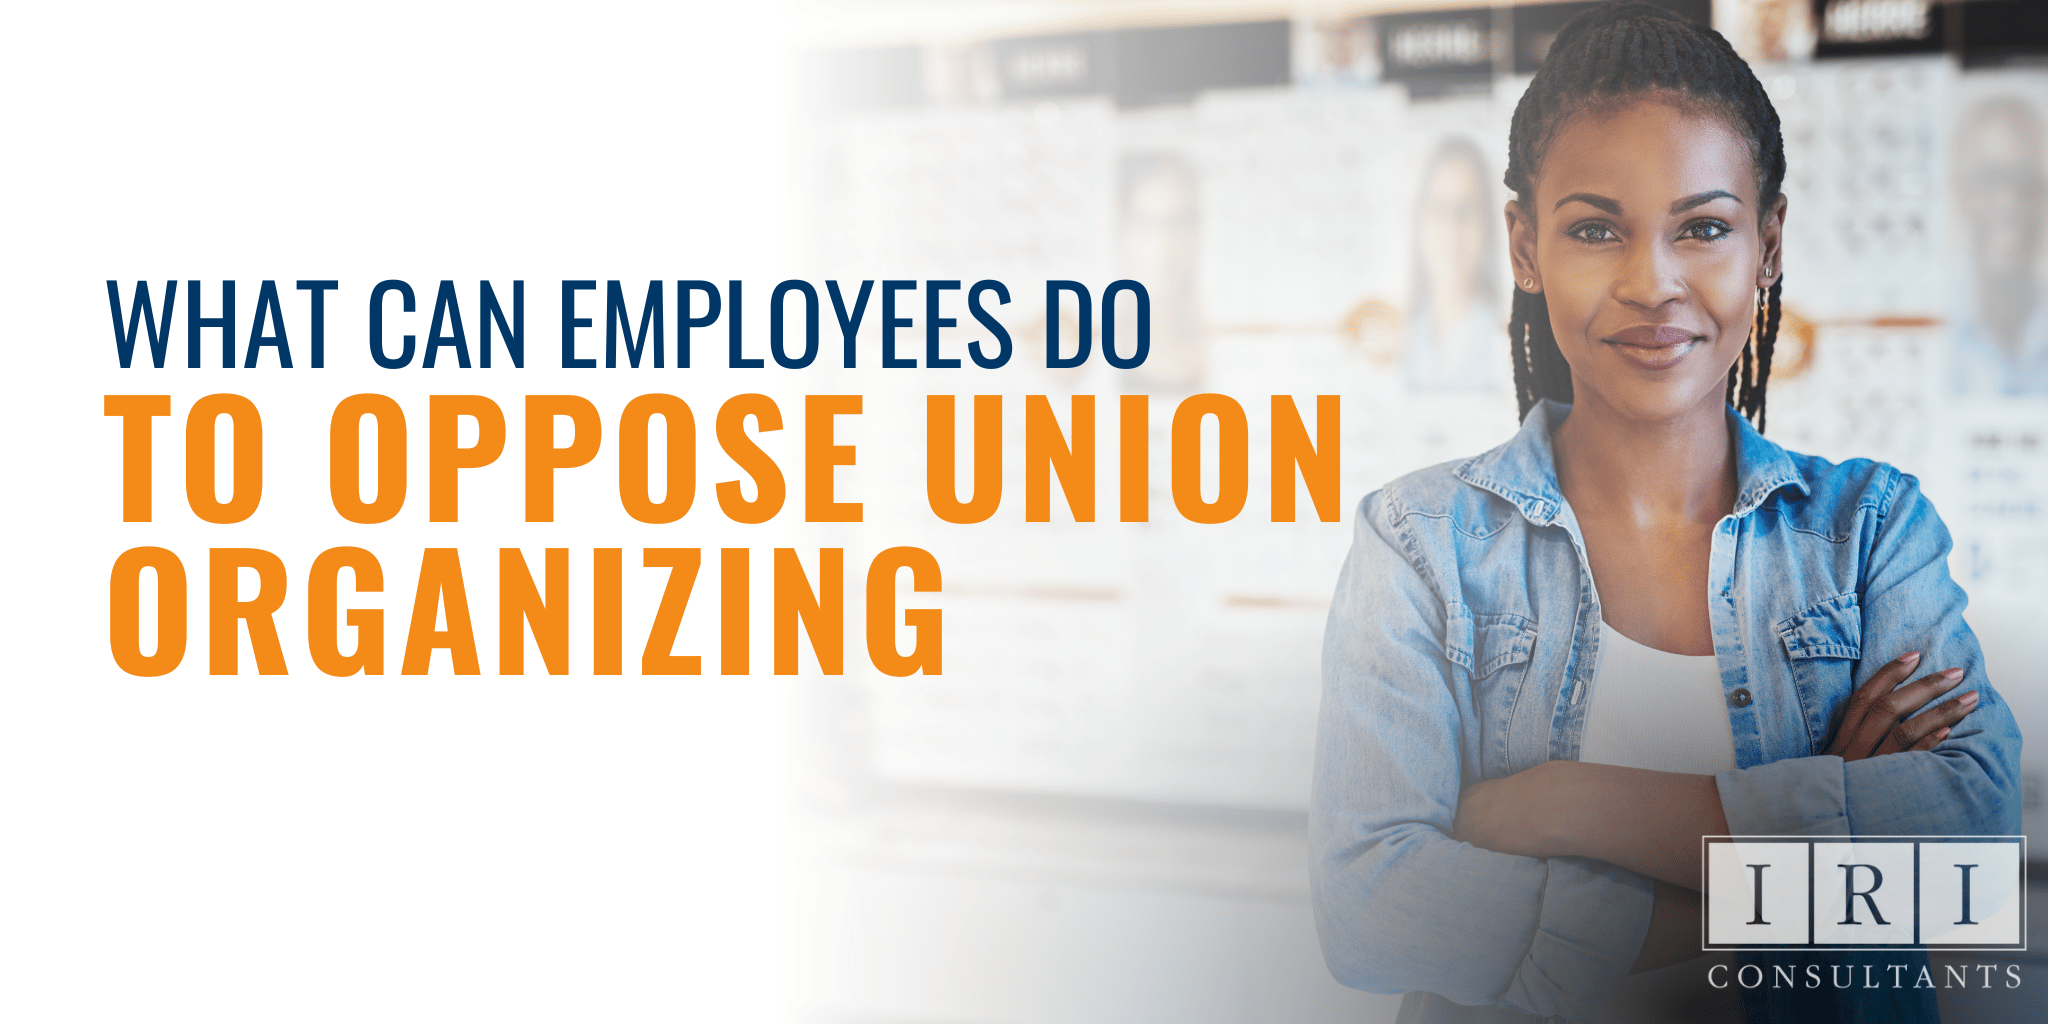 What Can Employees Do To Oppose Union Organizing Campaigns